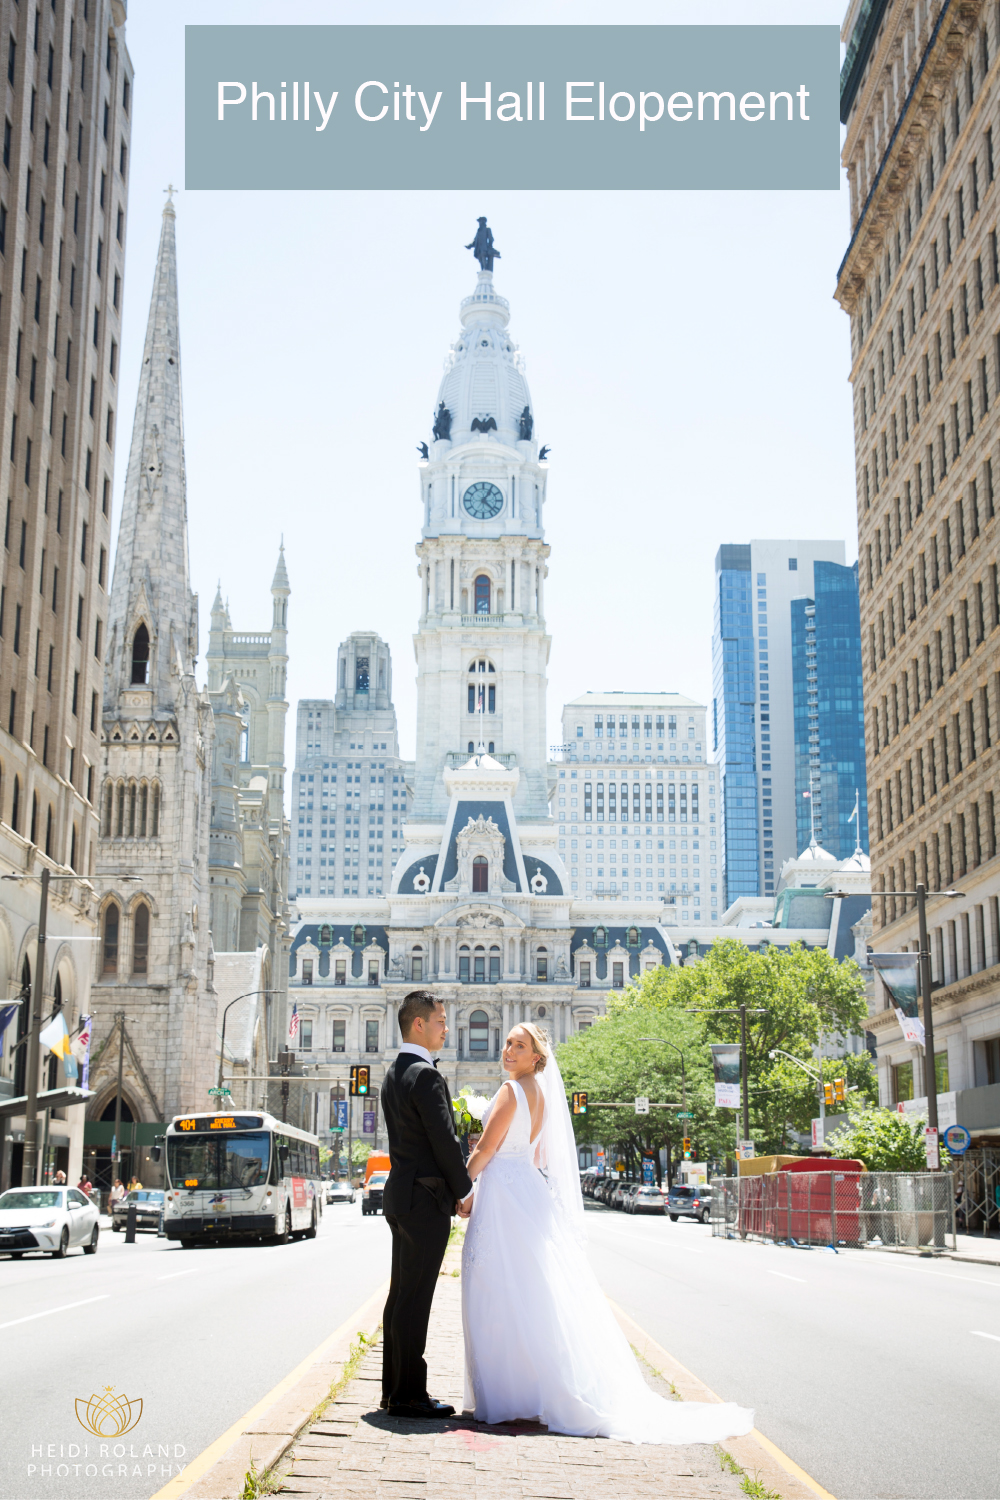 Philly City Hall Elopement